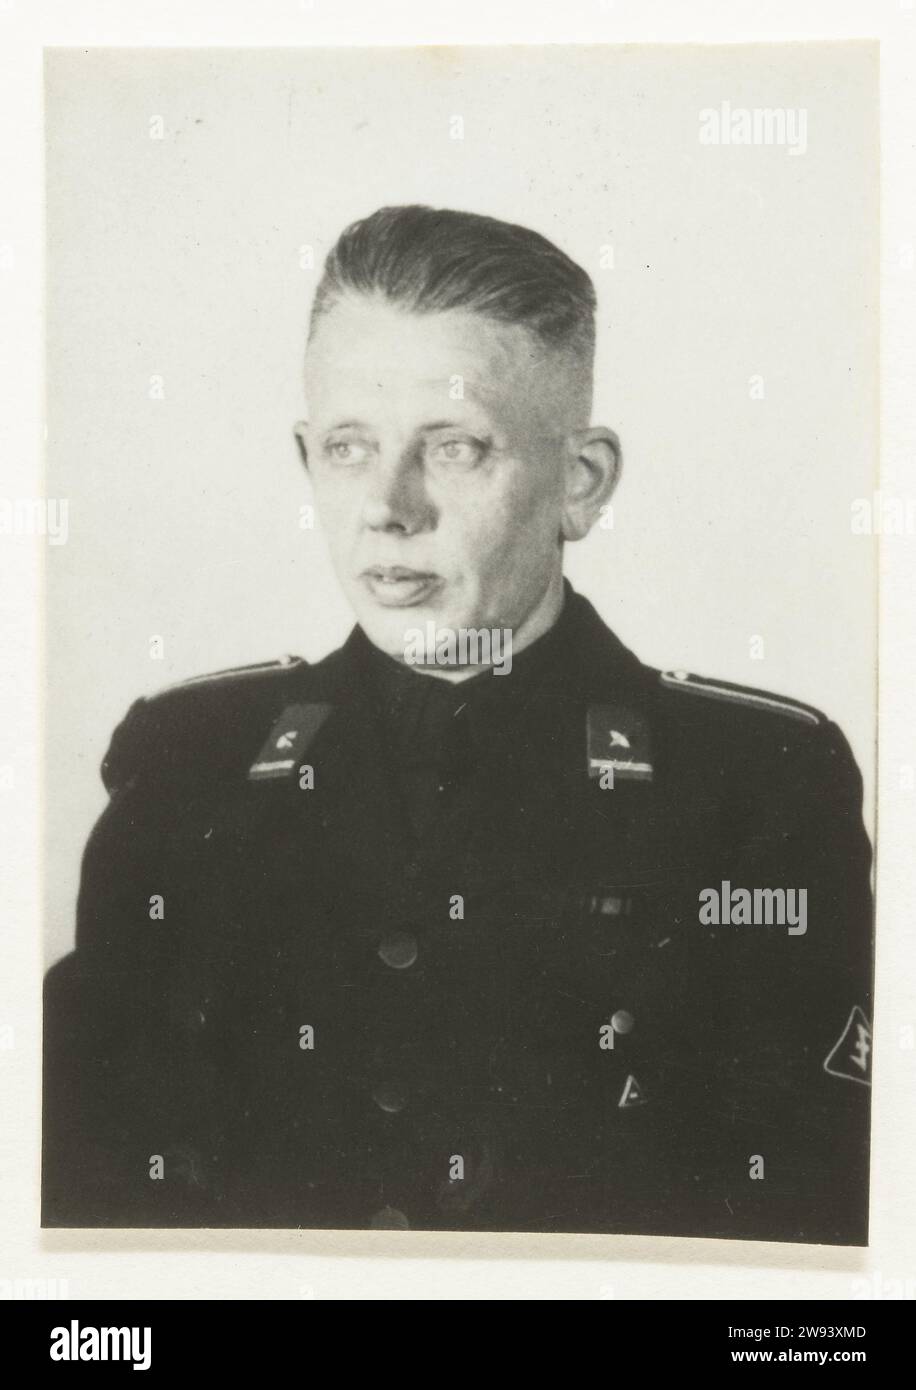 Portrait of a member of De Wa, 1940 - 1944 contact print Portrait of a member of the WA. On his collar a distinctive of a star with a line underneath: lower frame WA, Vaandrig. Braided shoulder covering, the Wolfsangel on his left sleeve. Barefoot. Netherlands photographic support gelatin silver print anonymous historical person portrayed Netherlands Stock Photo